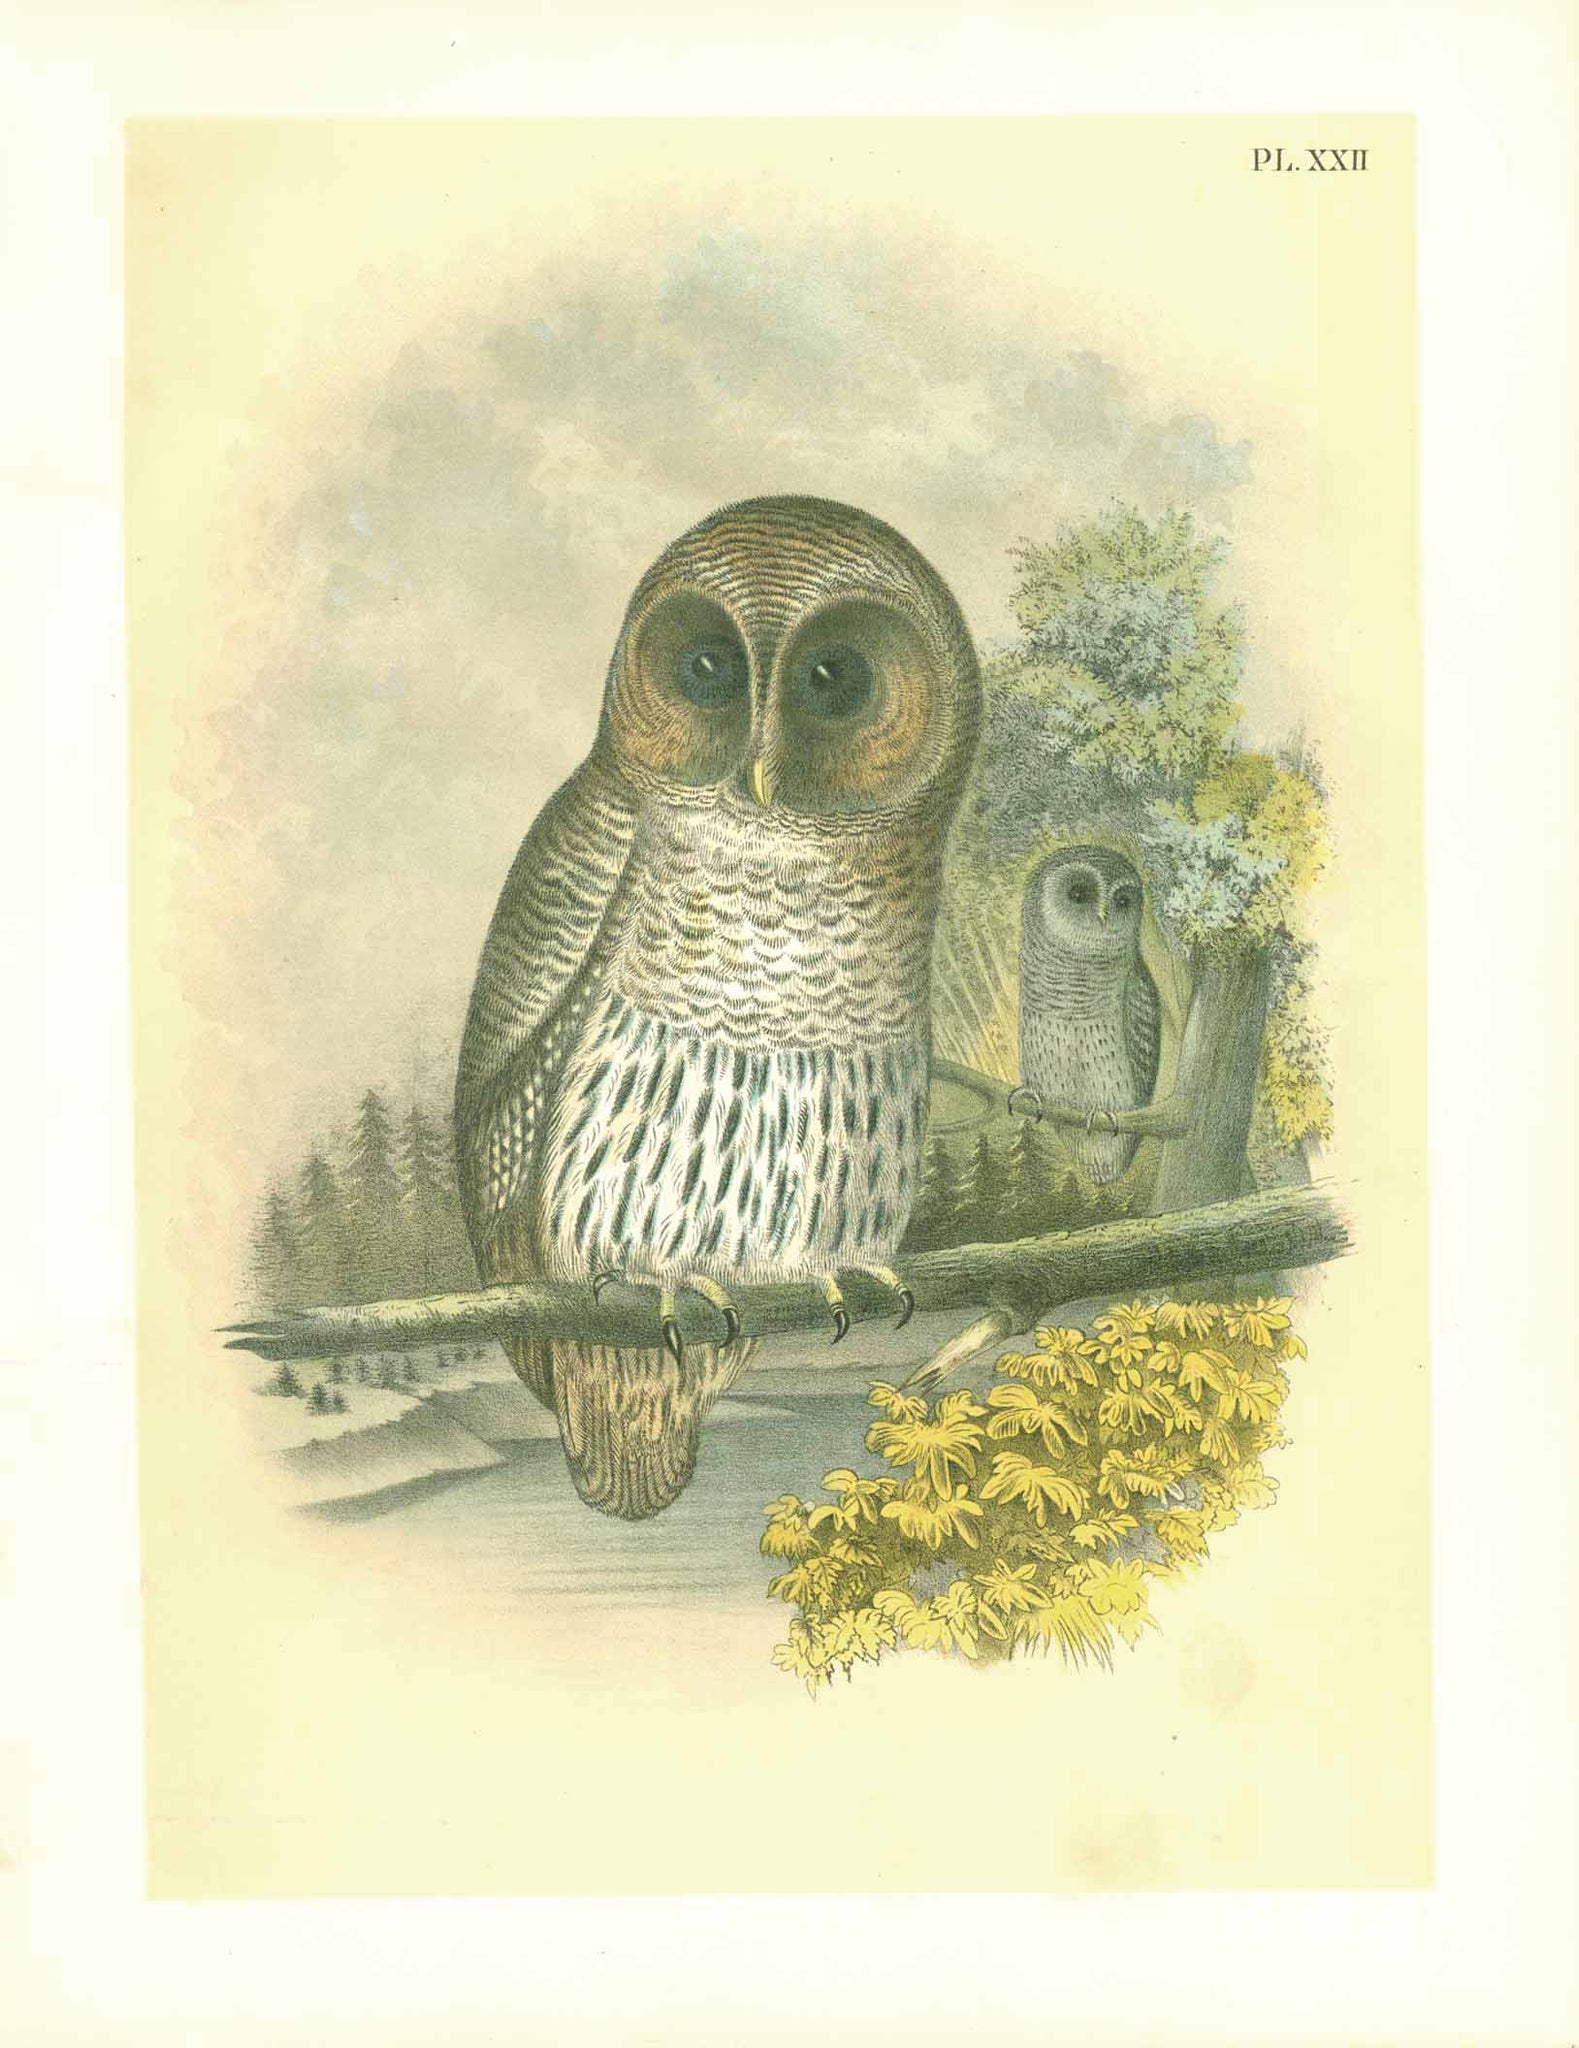 Studer Plate XXII - Owl  Publlication: "Studer's Birds of North America"  by Jacob Henry Studer (1840-1904)  Chromolithograph, 1878  Only minimal traces of age and use.  Page: 36 x 27,5 cm (ca. 14.2 x 10.8")  The Barred Owl 